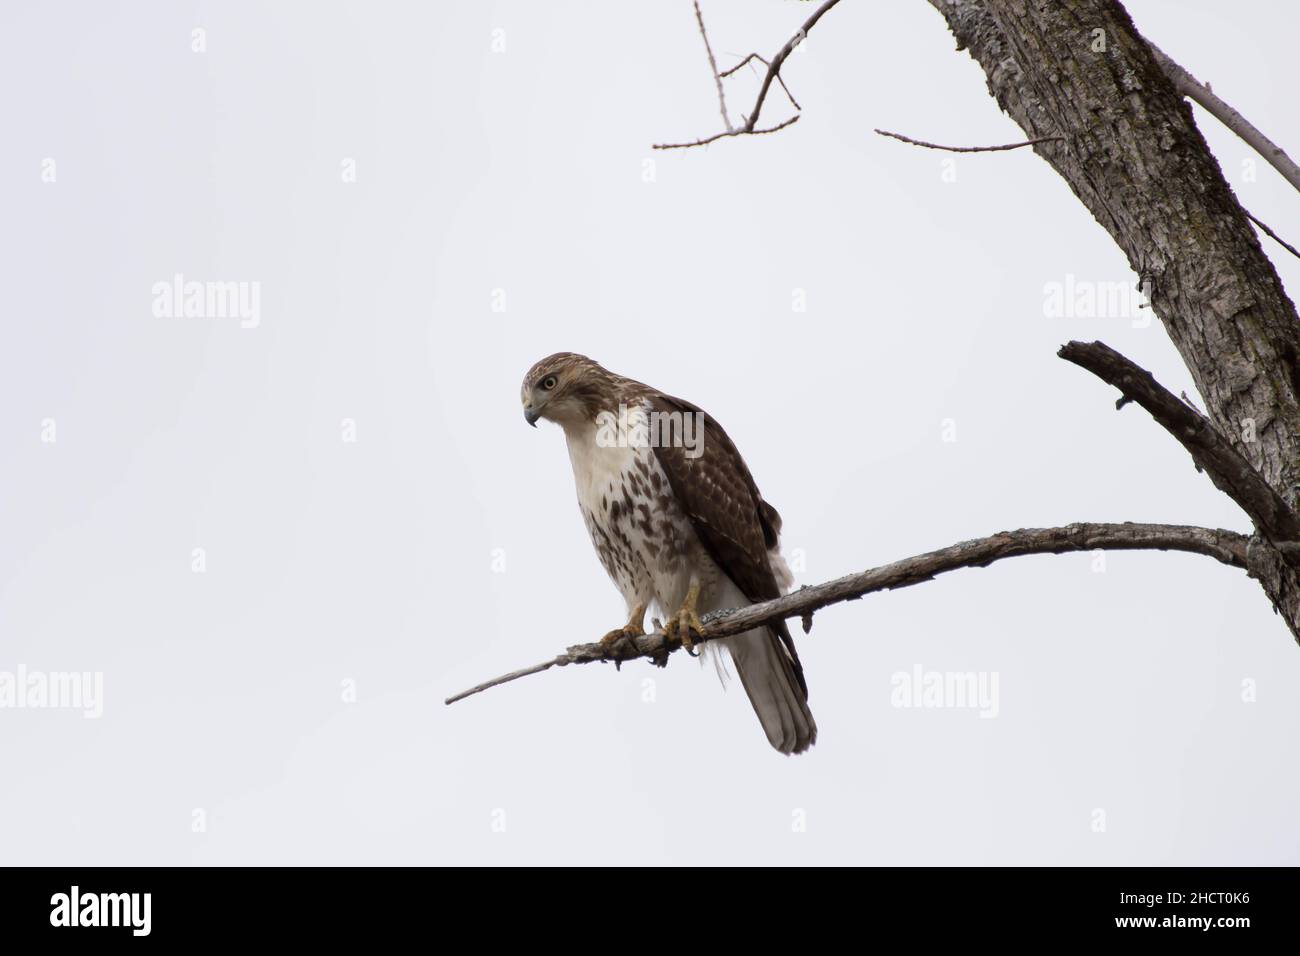 Red-tailed hawk perched in a tree Stock Photo